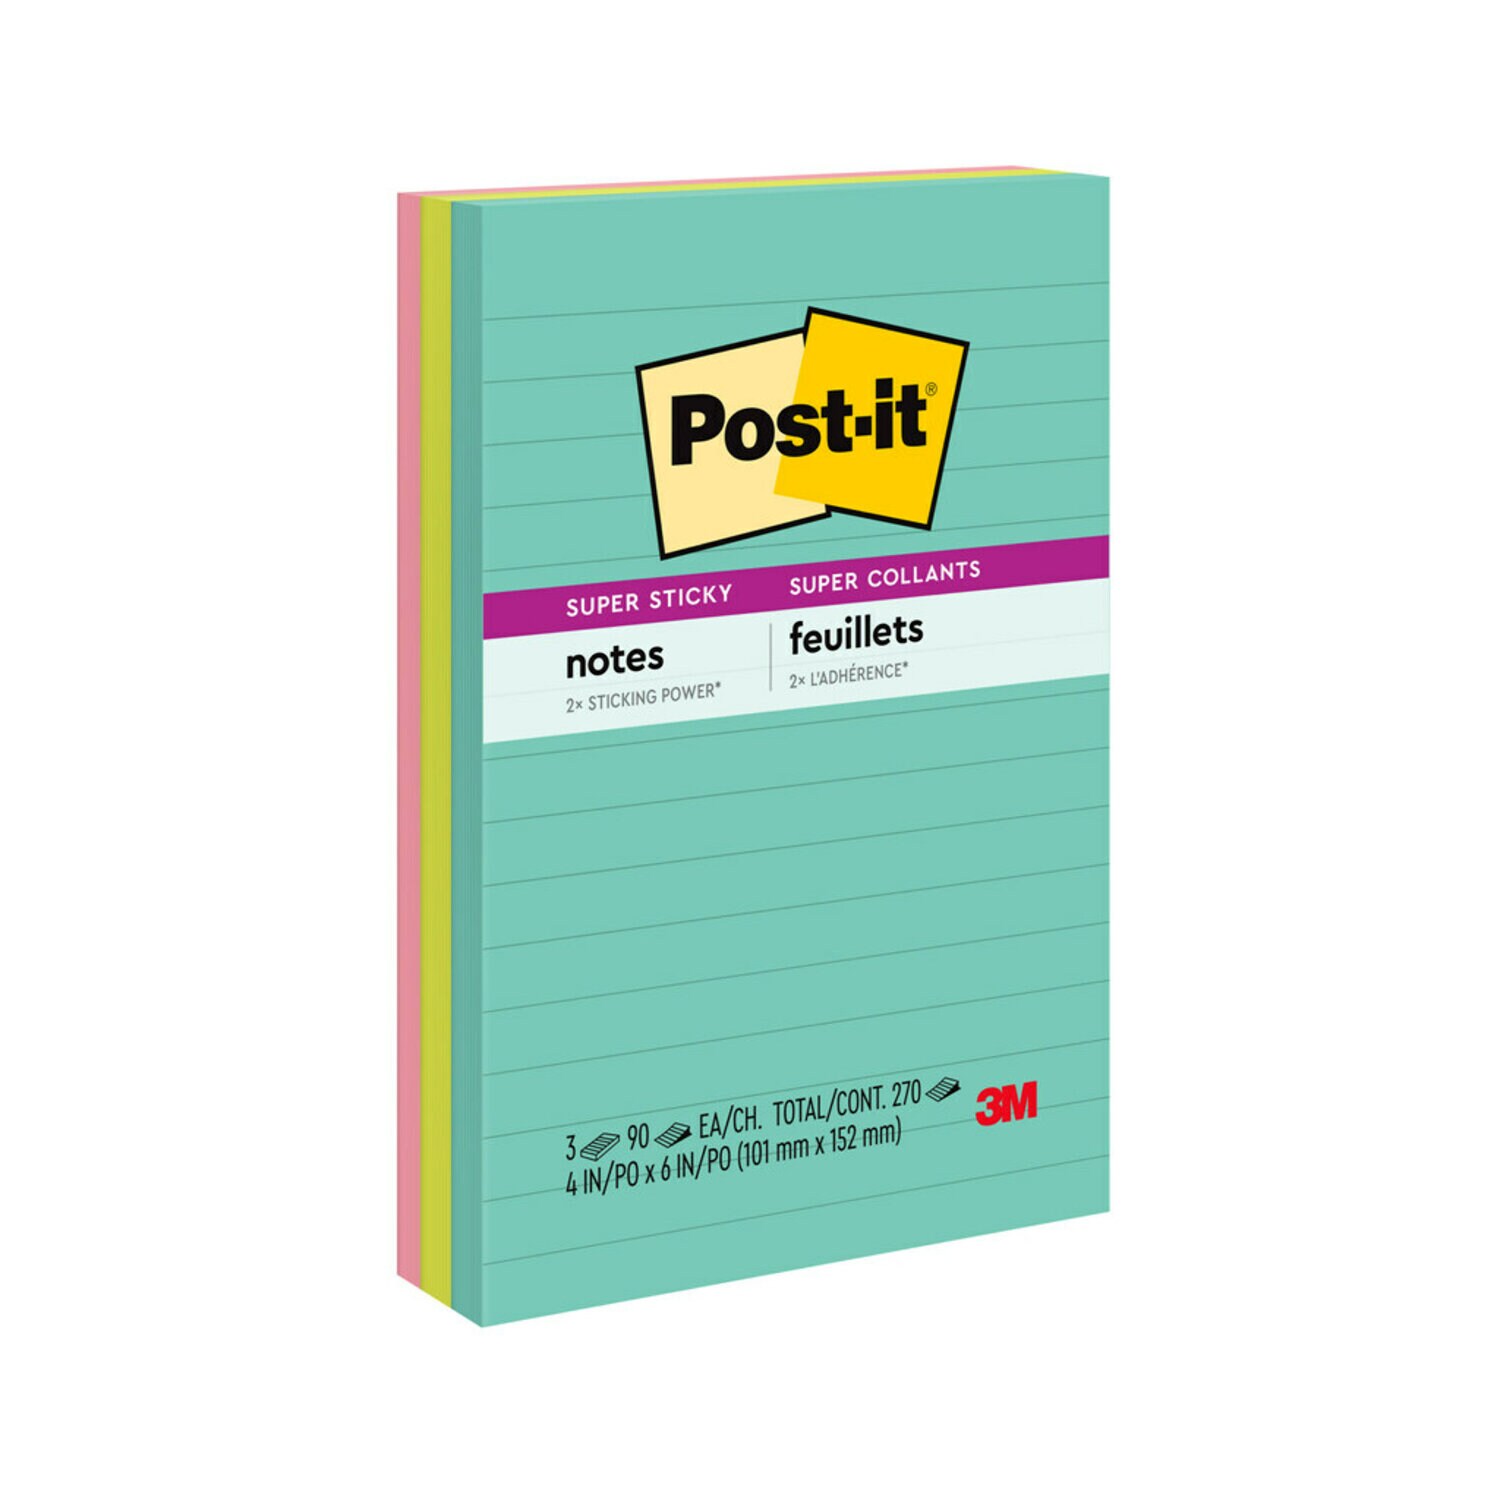 7100114061 - Post-it Super Sticky Notes 4645-3SSAN, 4 in x 6 in (101 mm x 152 mm),
Supernova Neons Collection, Lined, 3 Pads/Pack